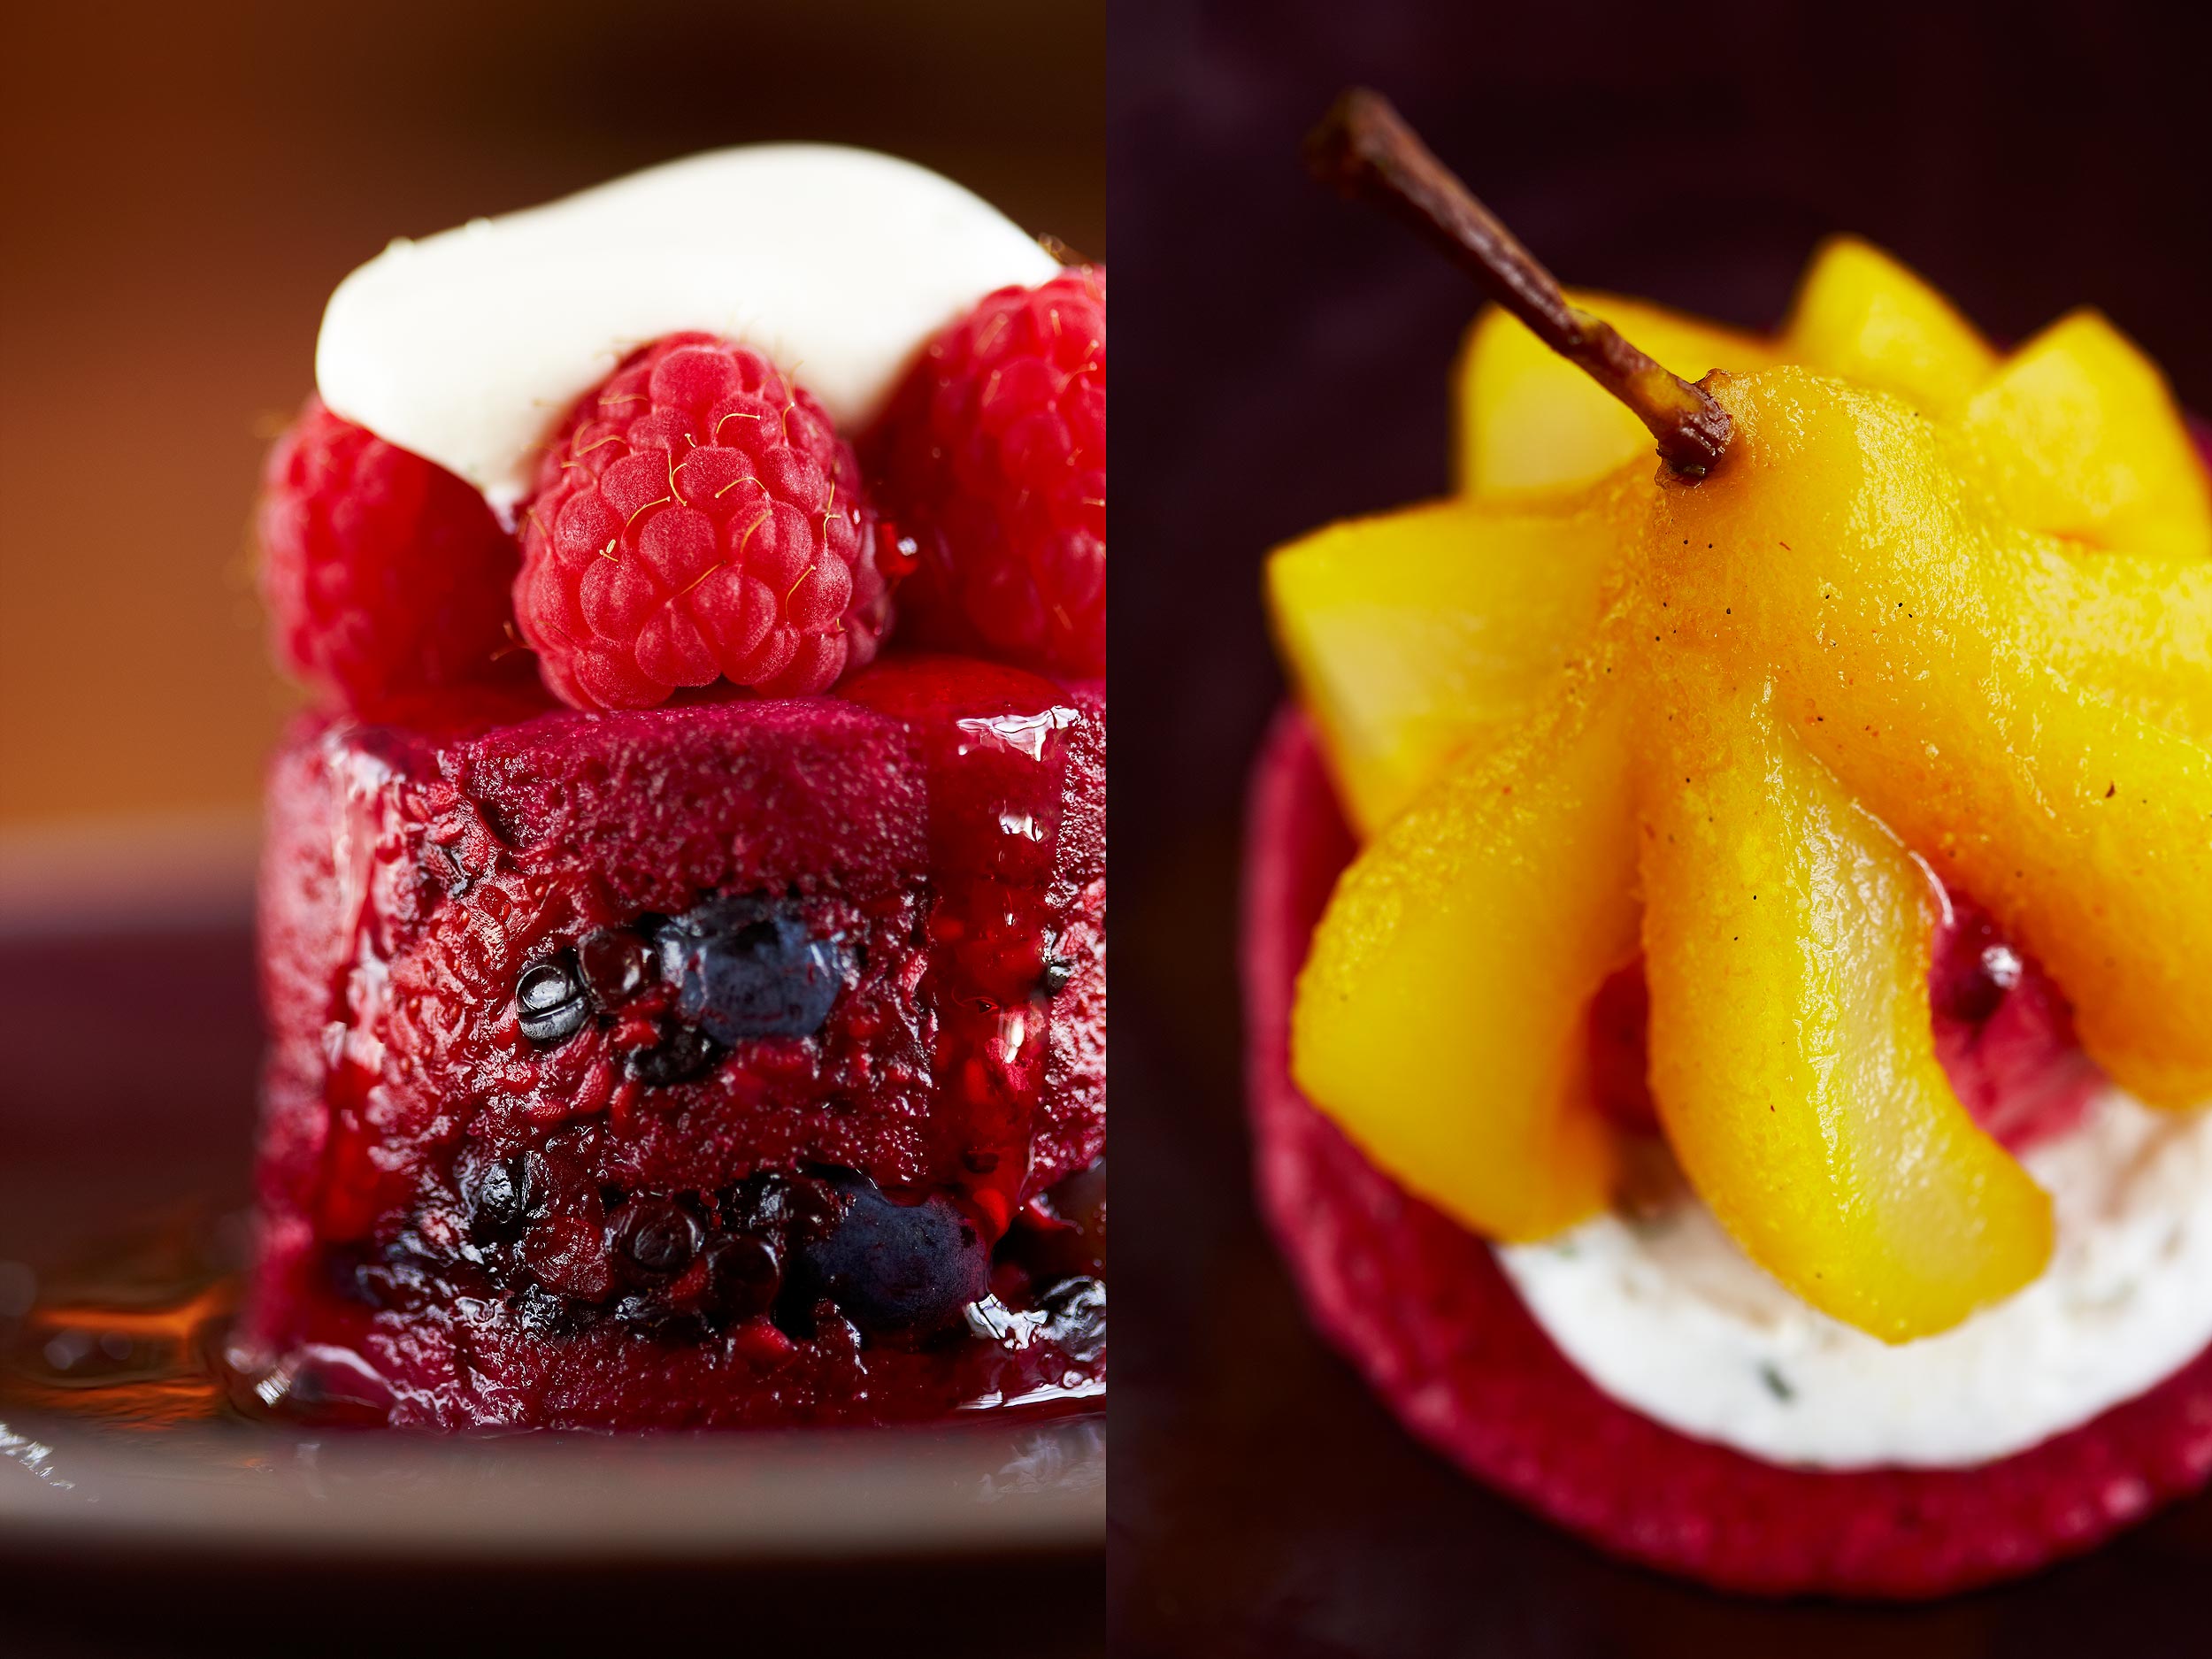 Desserts at Gleneagles, Scotland.  Food photography by Mike Caldwell